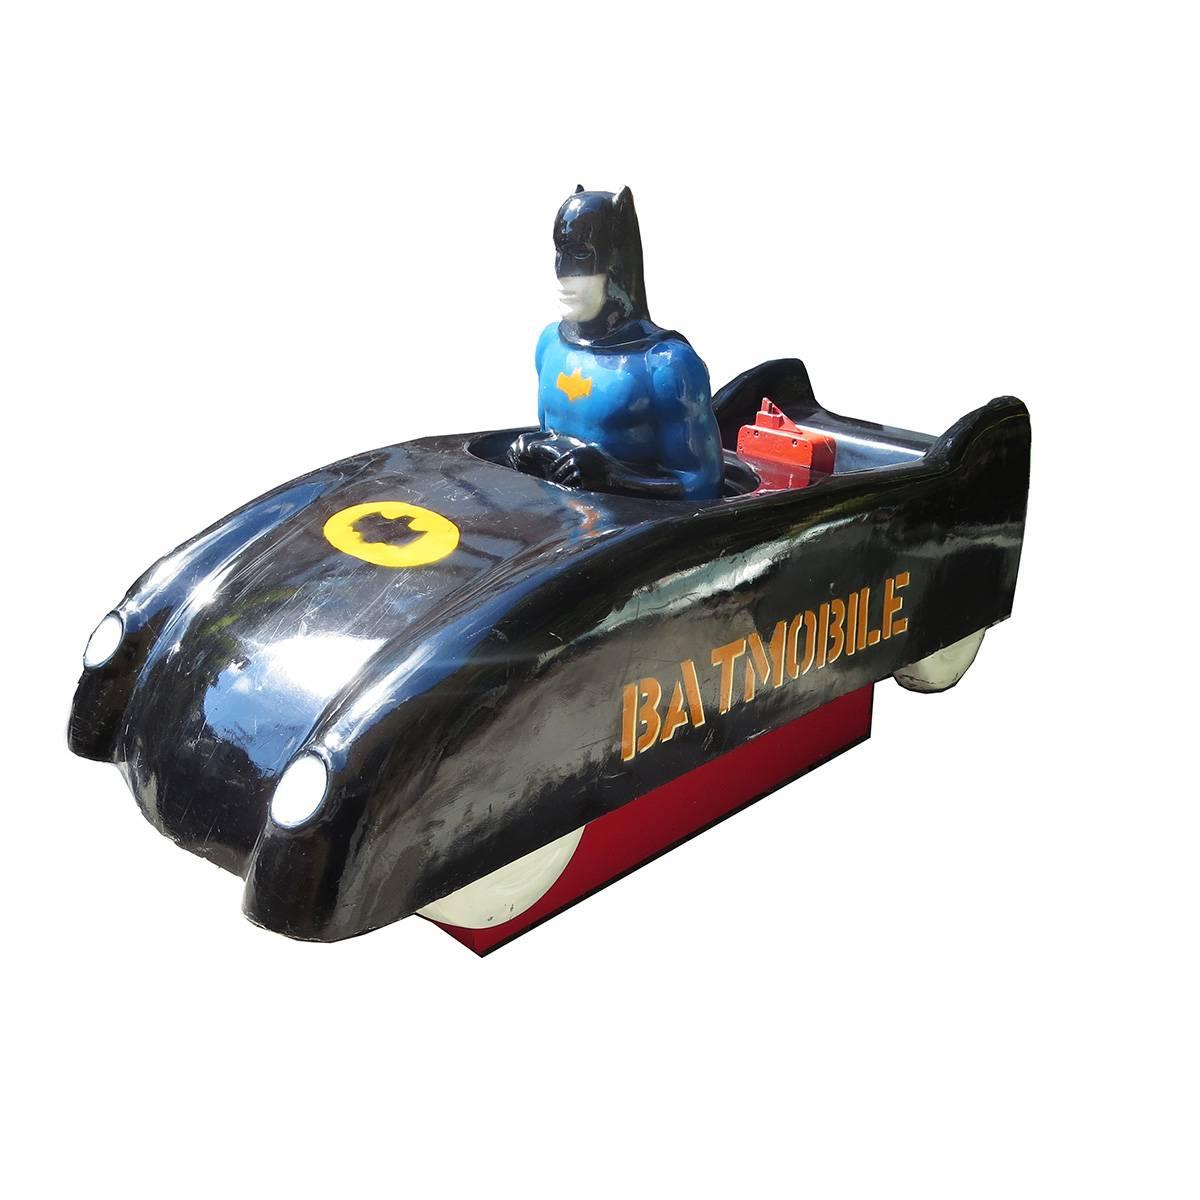 With the success of the Batman weekly television show in 1966, there was an abundance of licensed objects, from toys to lunch boxes. The rarest of all is this Batman coin operated supermarket kiddie ride. Made in very limited numbers, they are